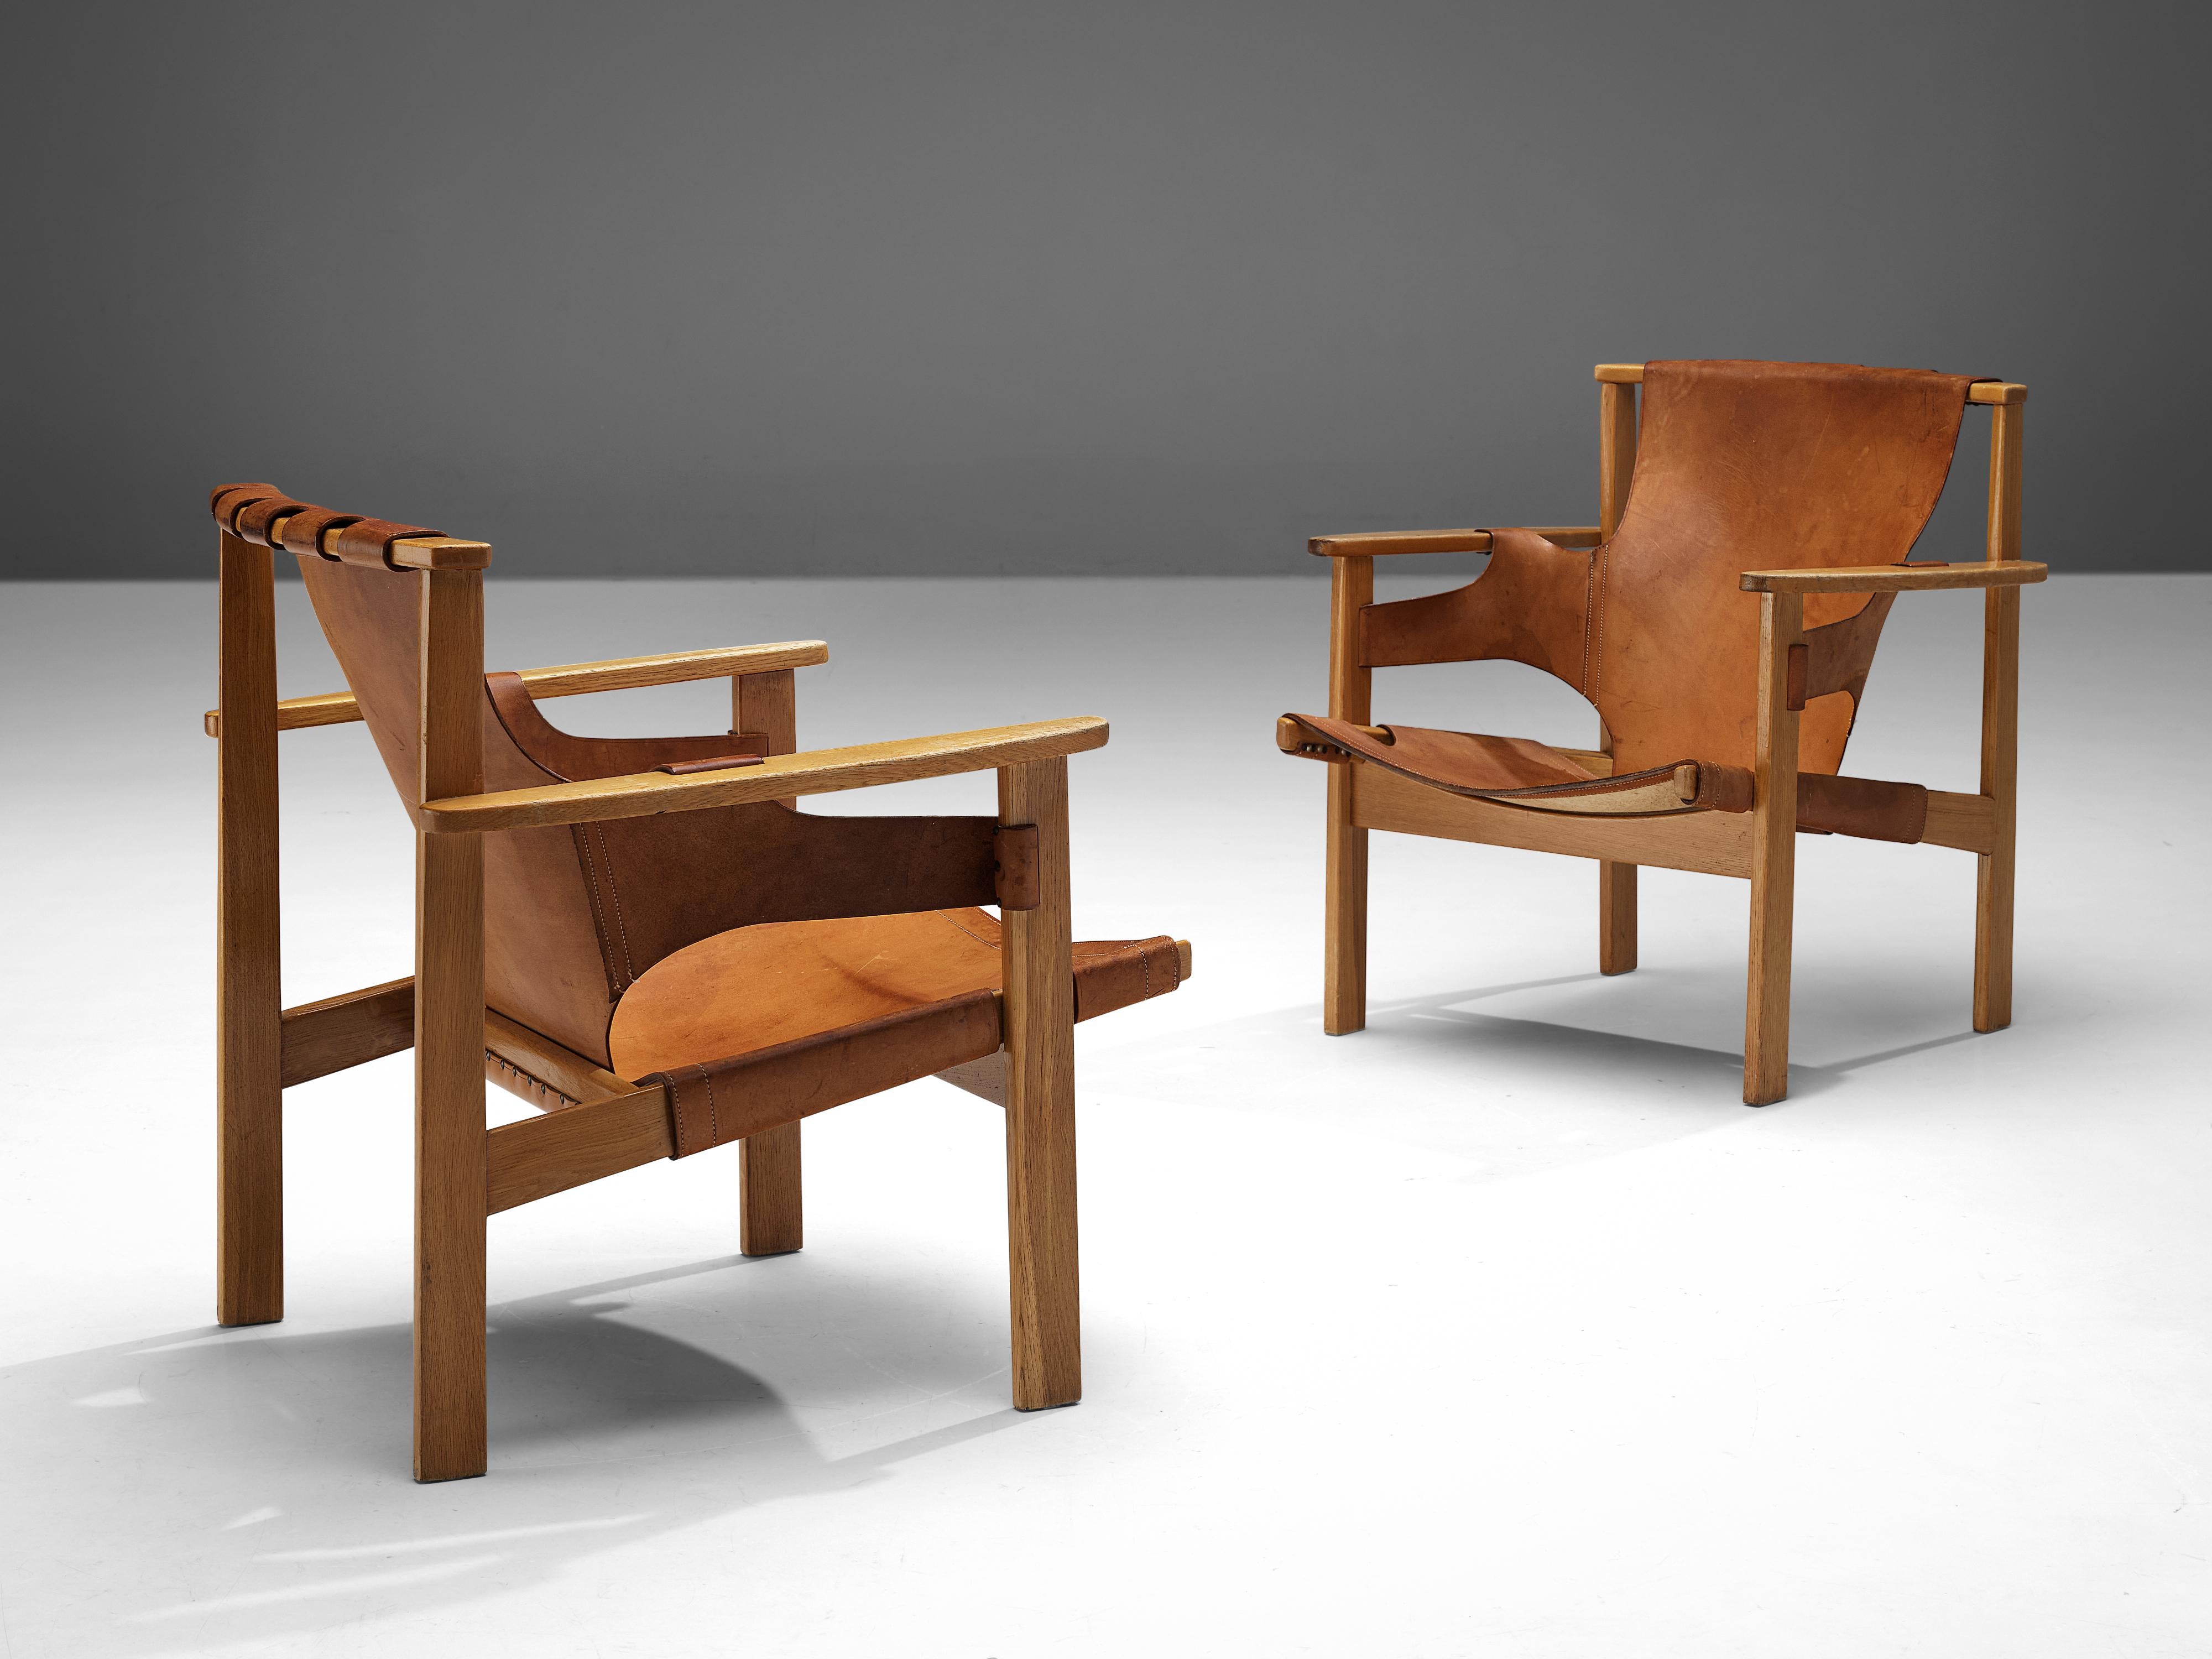 Carl-Axel Acking, pair of lounge chairs model ‘Trienna’, oak, leather, Sweden, designed in 1957

These characteristic lounge chairs were designed by the Swedish architect and furniture designer Carl-Axel Acking in 1957. The chair’s name 'Trienna'